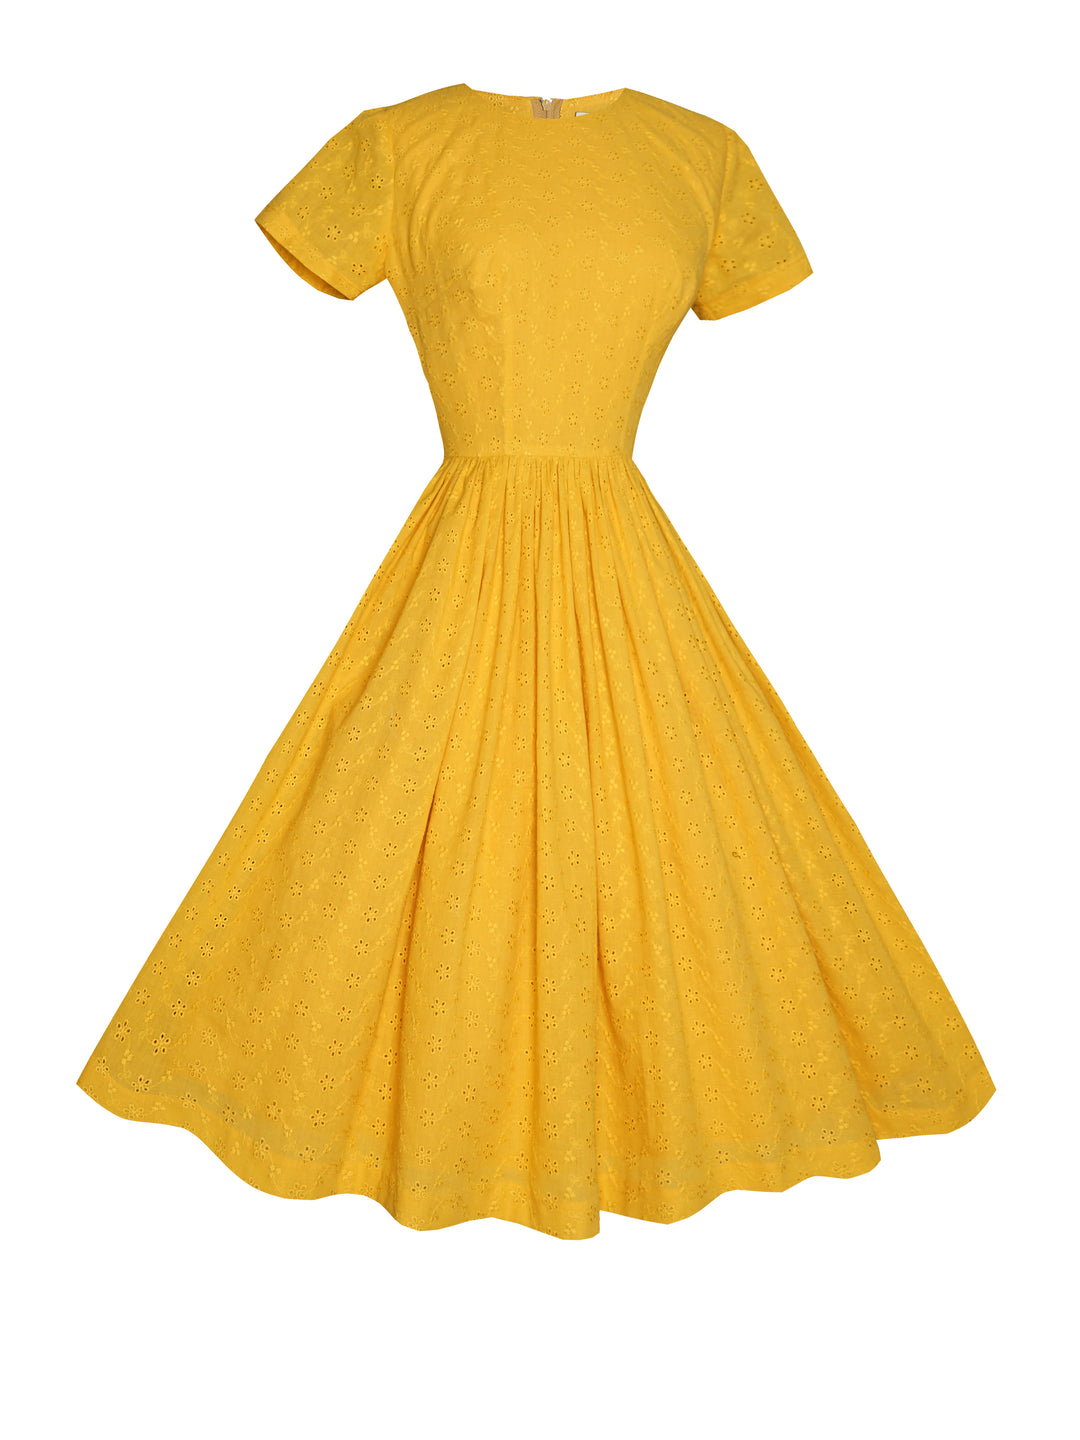 MTO - Dorothy Dress Mustard "Forget Me Not" Eyelet